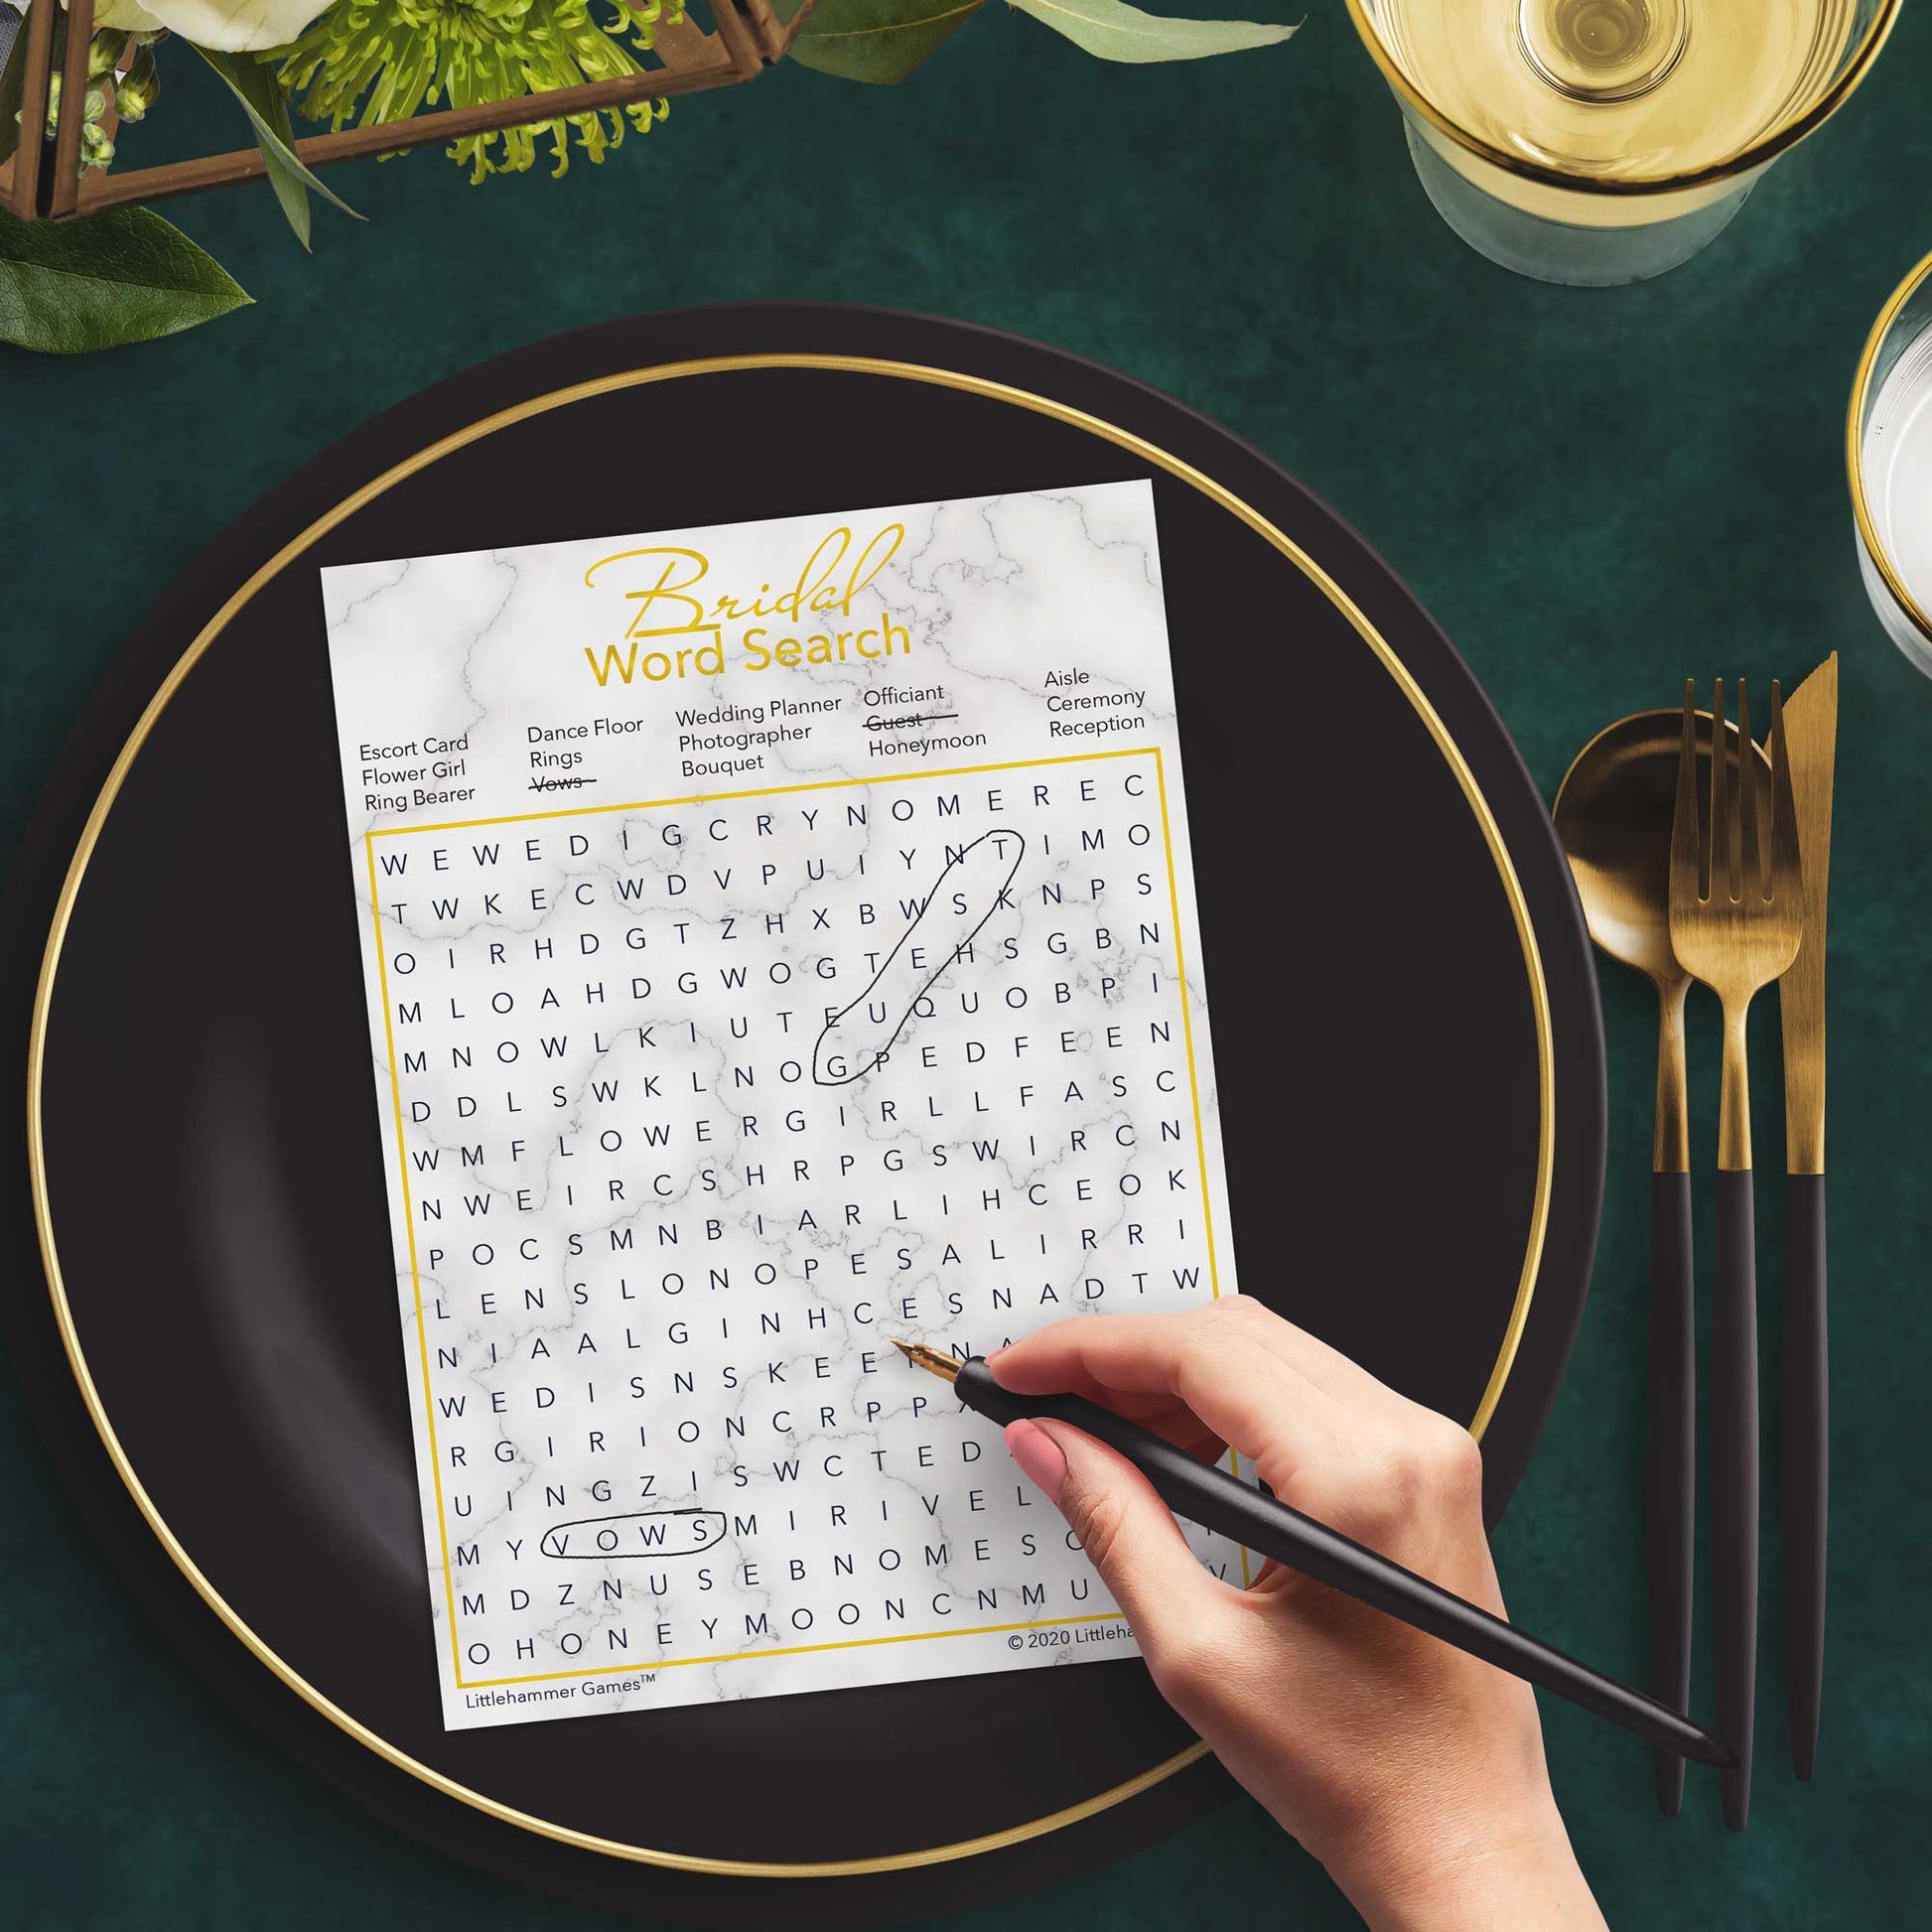 Woman with a pen playing a gold and marble Bridal Word Search game card at a dark place setting